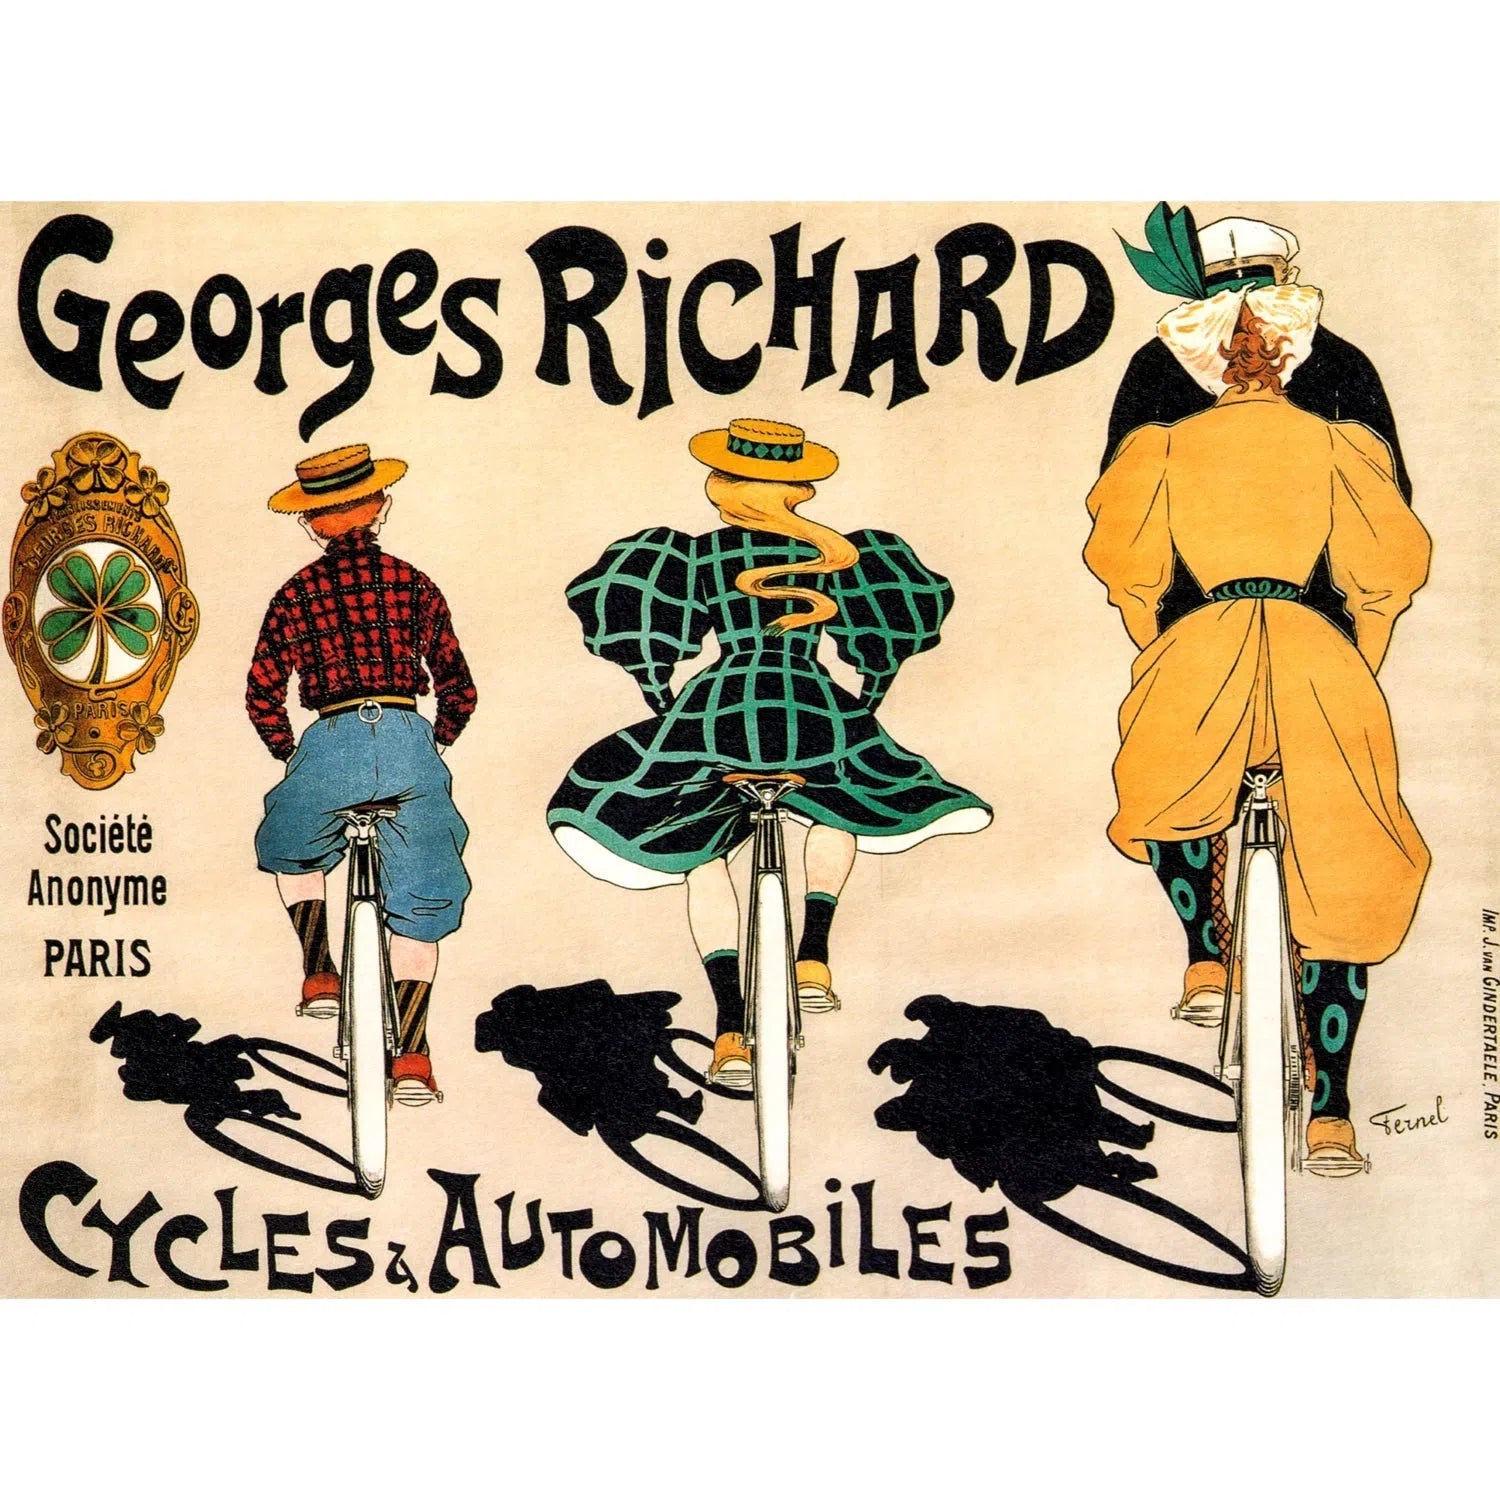 Georges Richard - Cycles & automobiles-Imagesdartistes